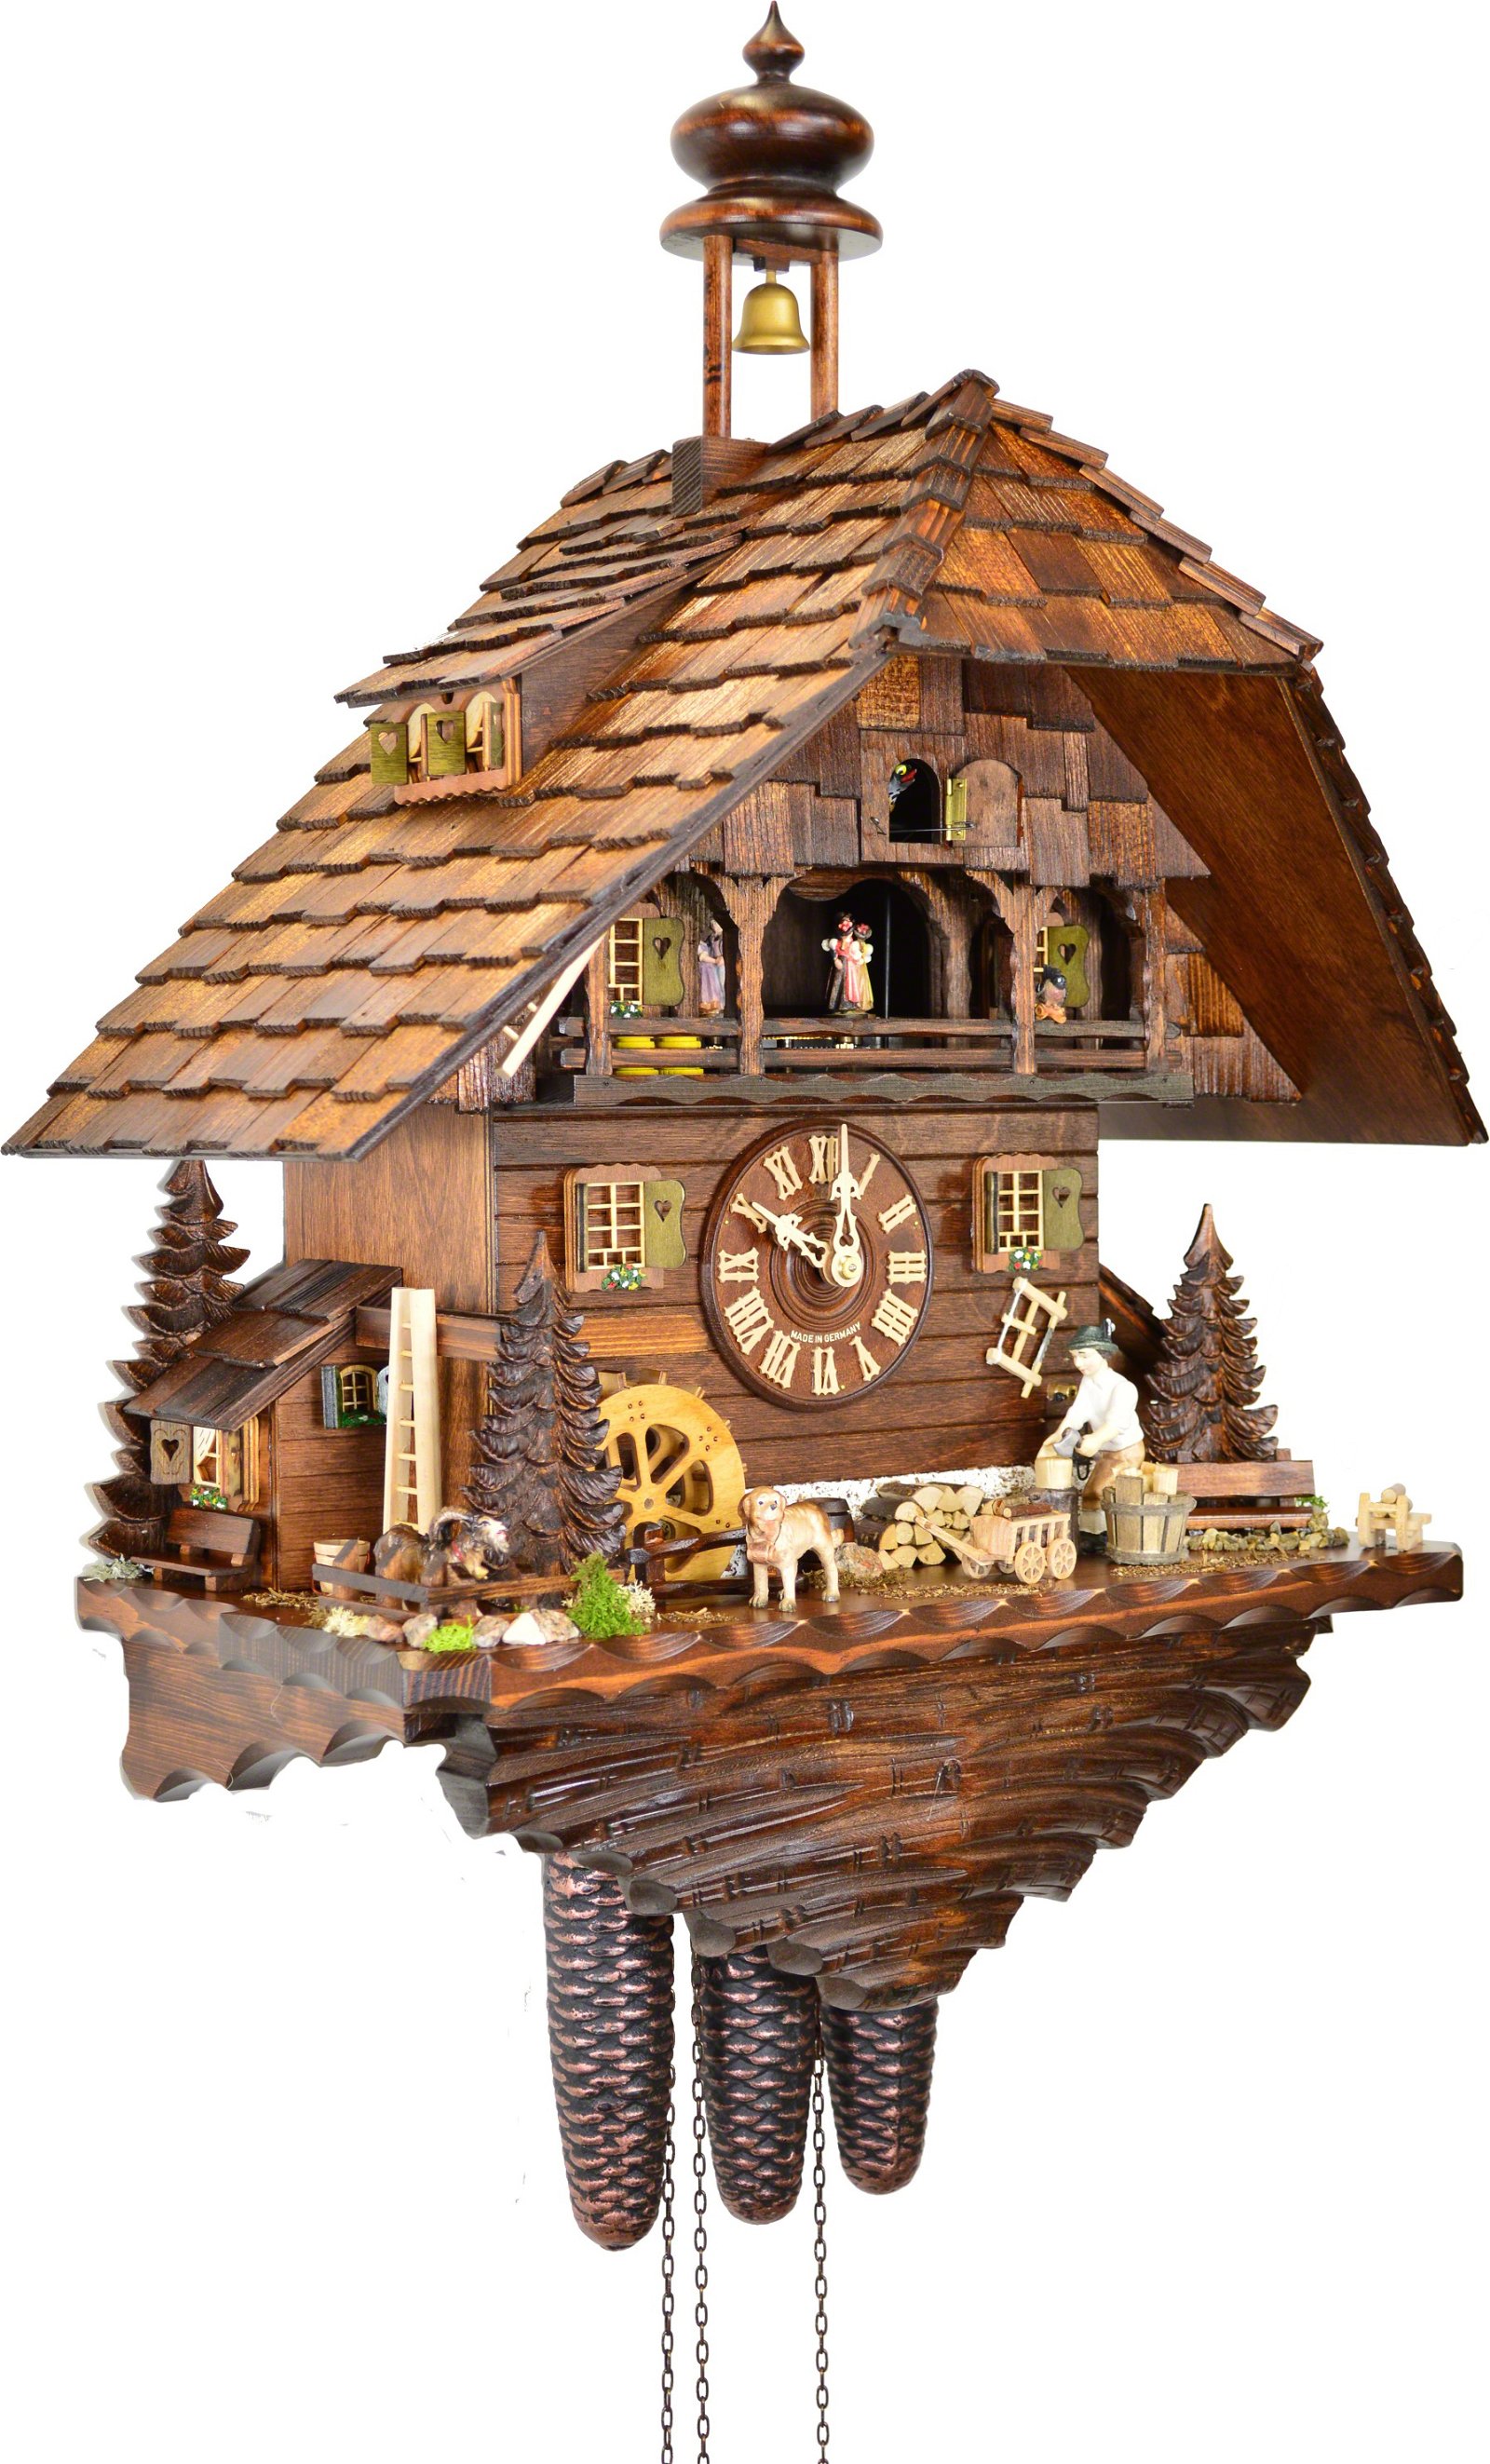 Cuckoo Clock Chalet Style 8 Day Movement 62cm by August Schwer